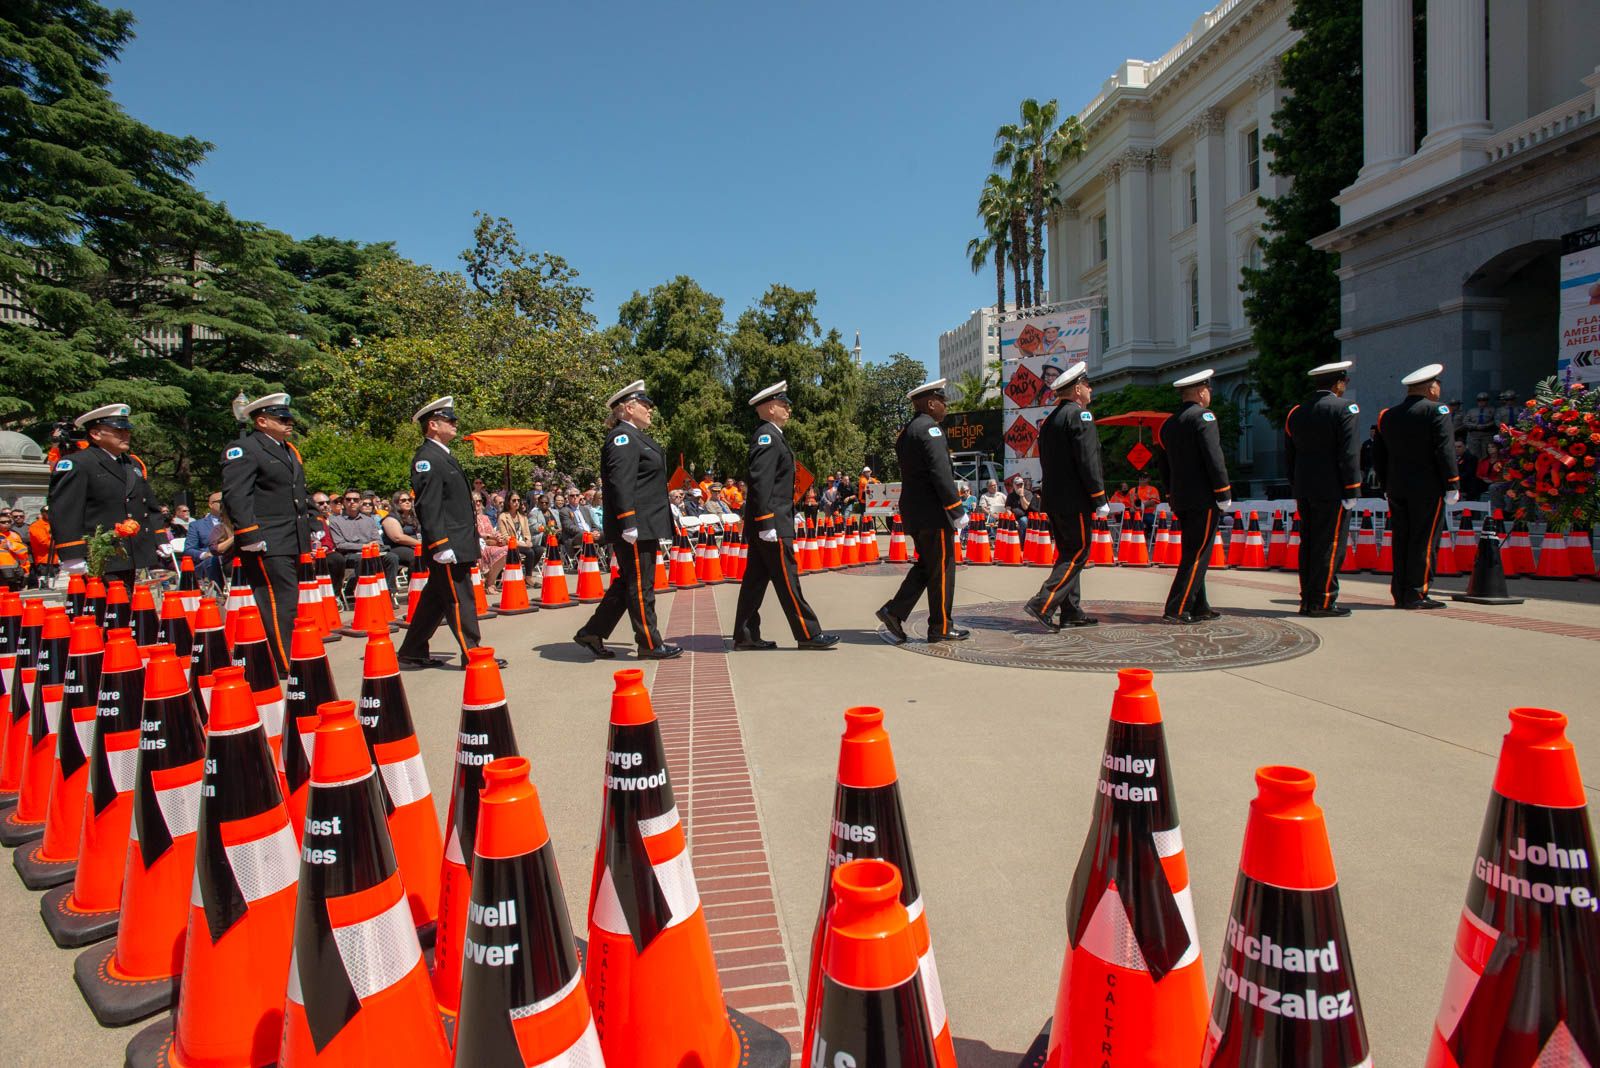 Photo of the 2022 Caltrans Workers Memorial Ceremony. Orange cones with black name bands representing the 189 fallen state highway workers who died in the line of duty since 1921 are arranged in a diamond shape like a caution sign. Inside the diamond, uniformed Caltrans Honor Guards place a ceremonial black cone in front of a floral wreath during the memorial.